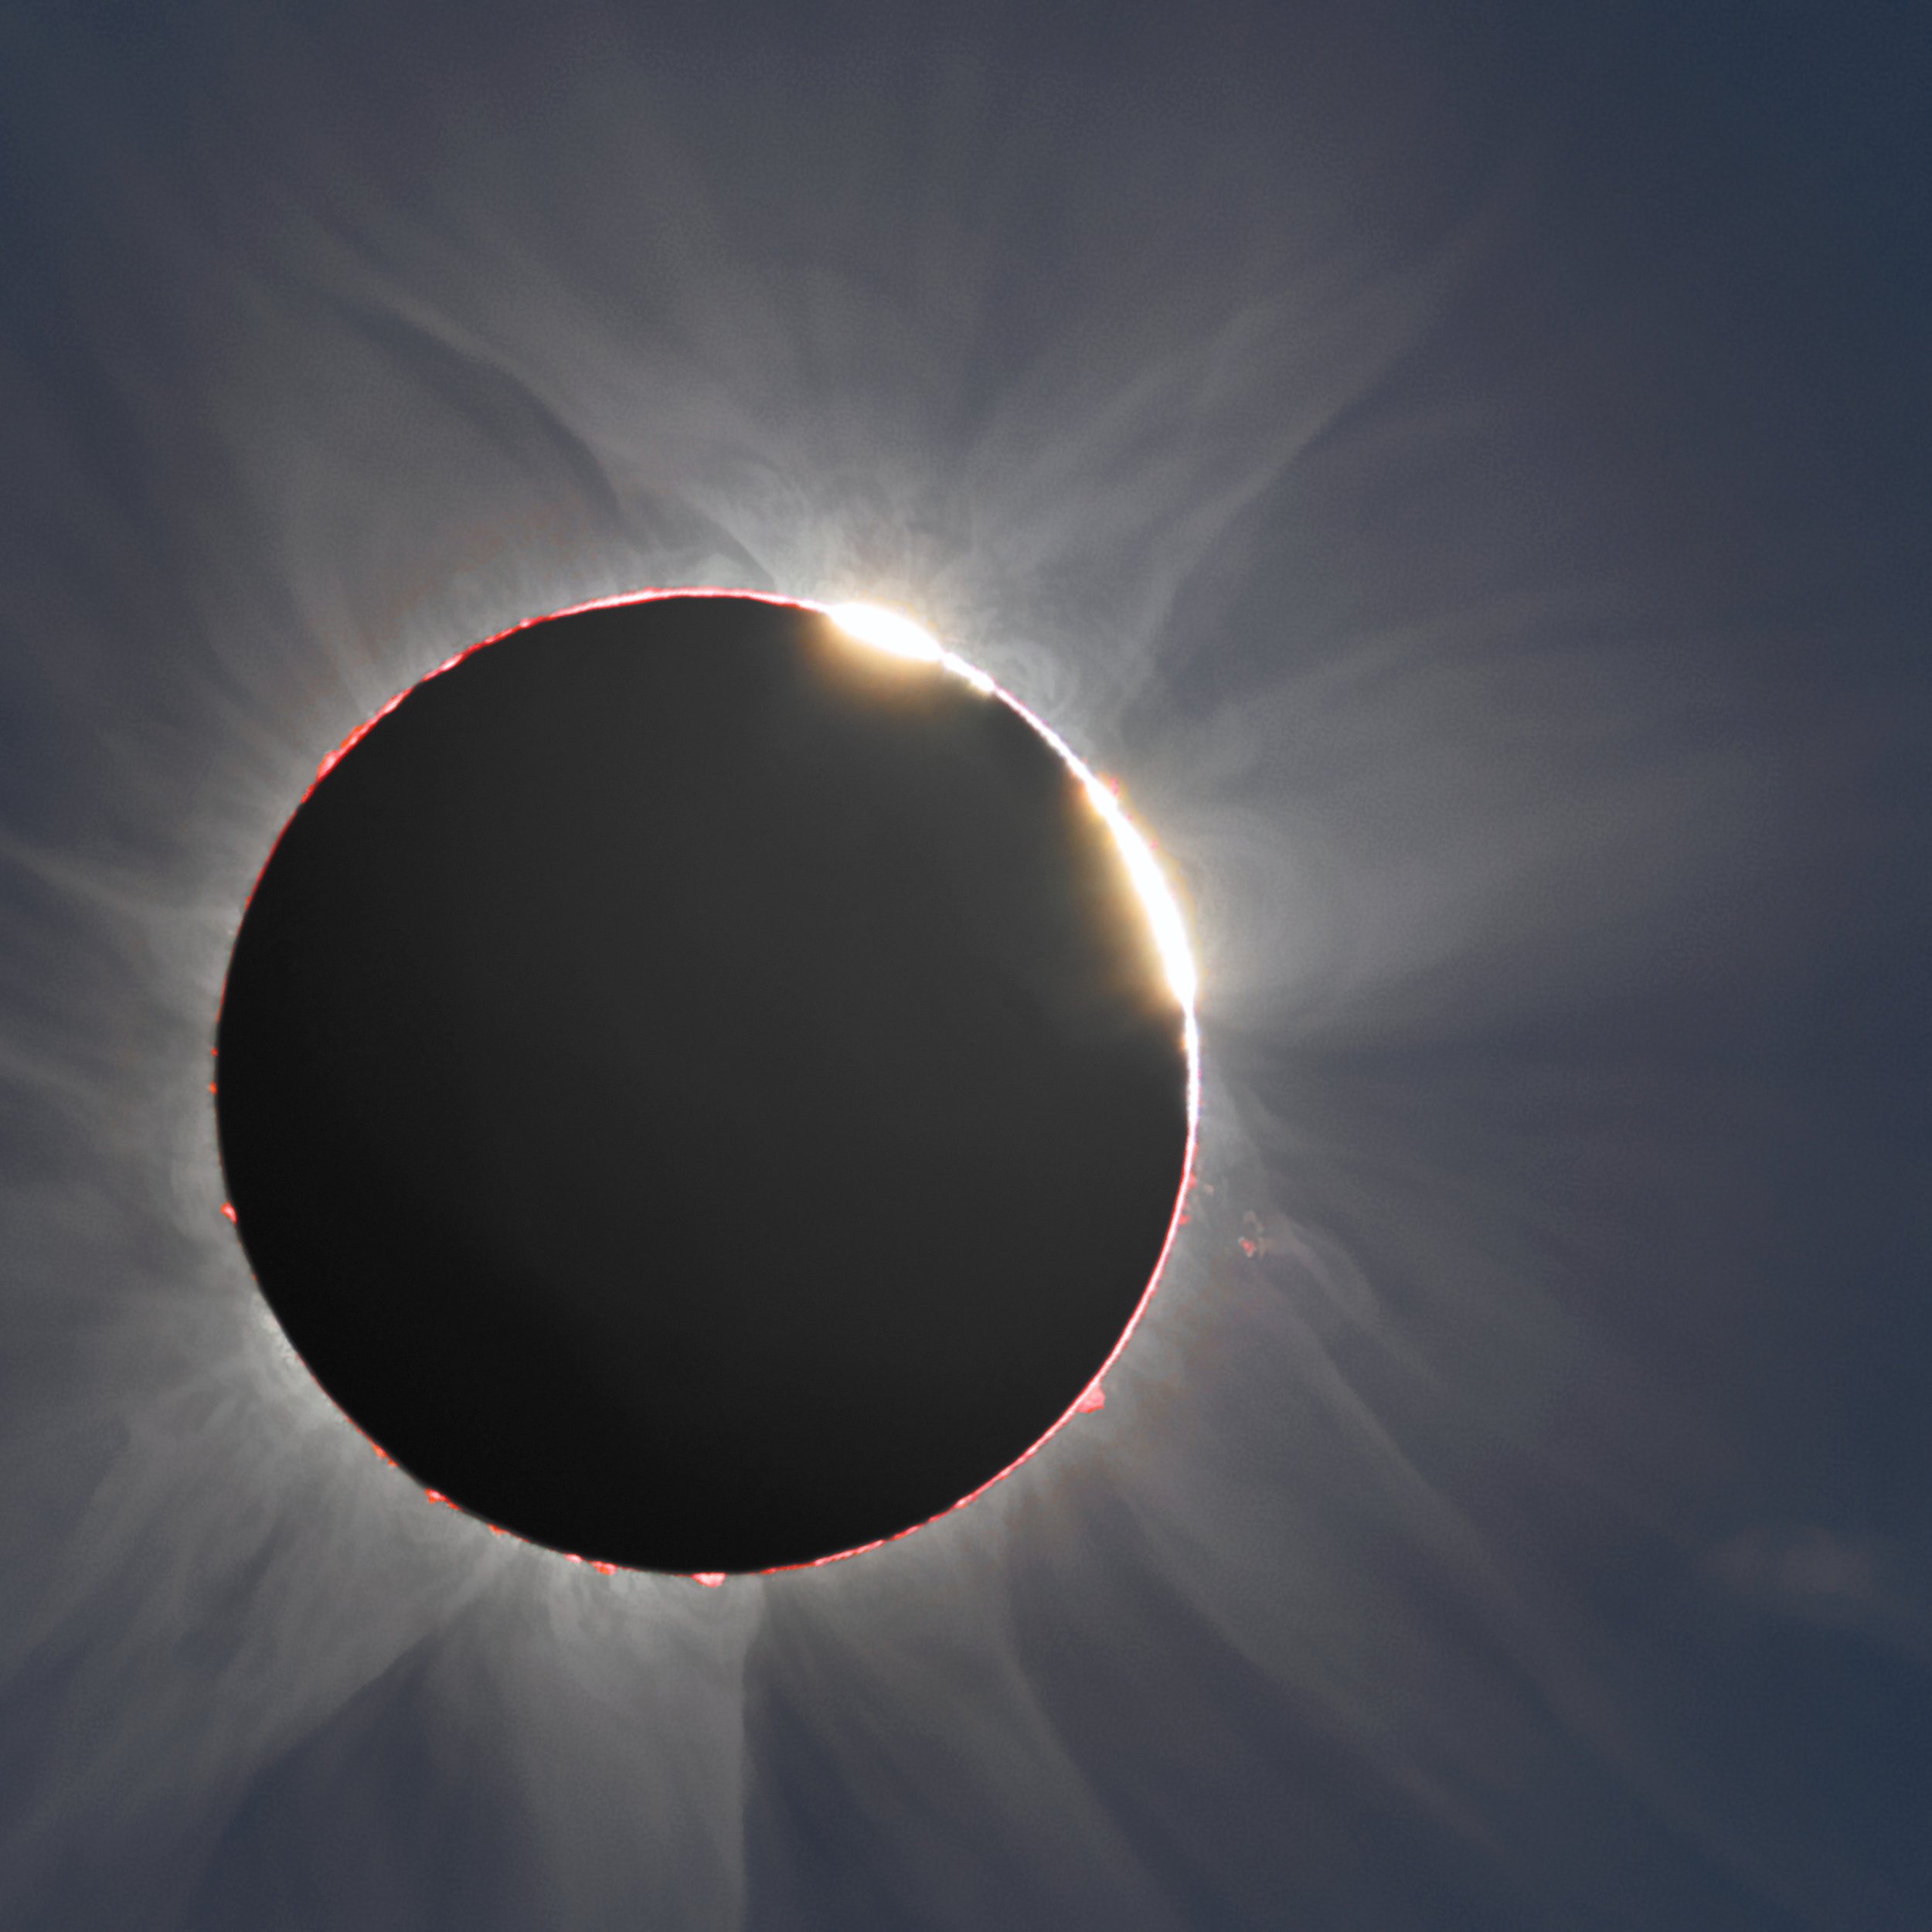 How to watch extremely rare 'ring of fire' solar eclipse